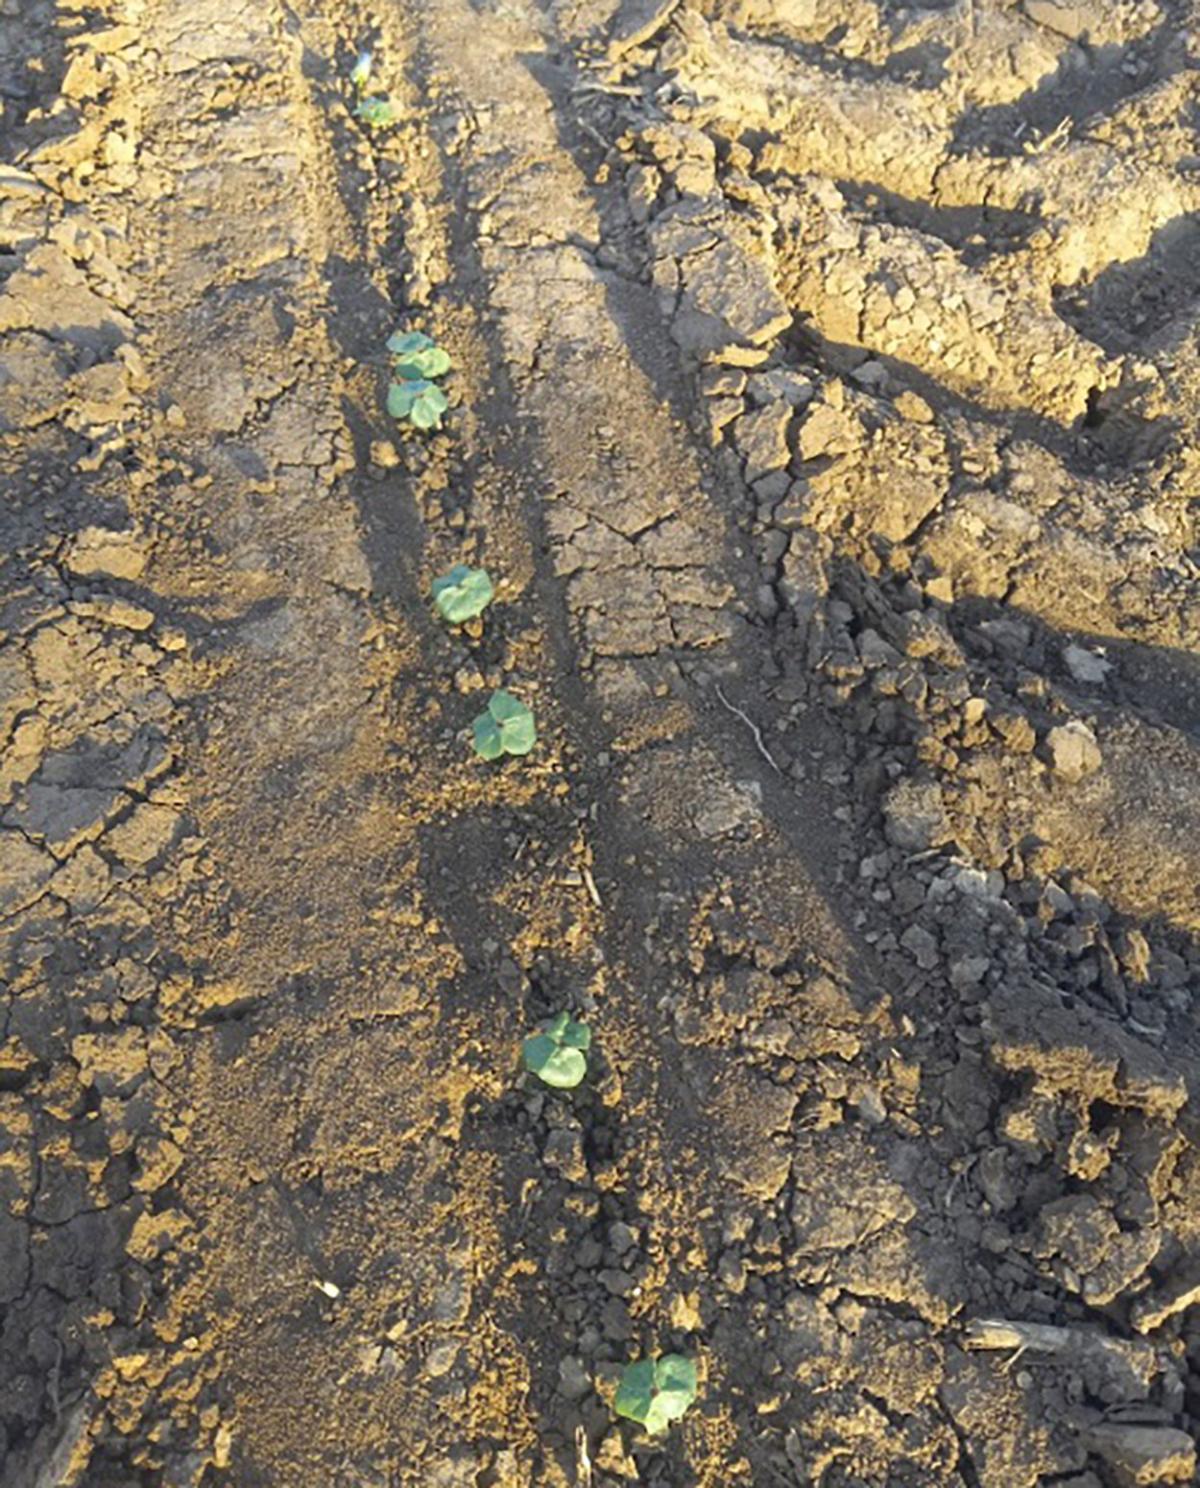 Indentations into tilled soil from a tractor tire and planter.